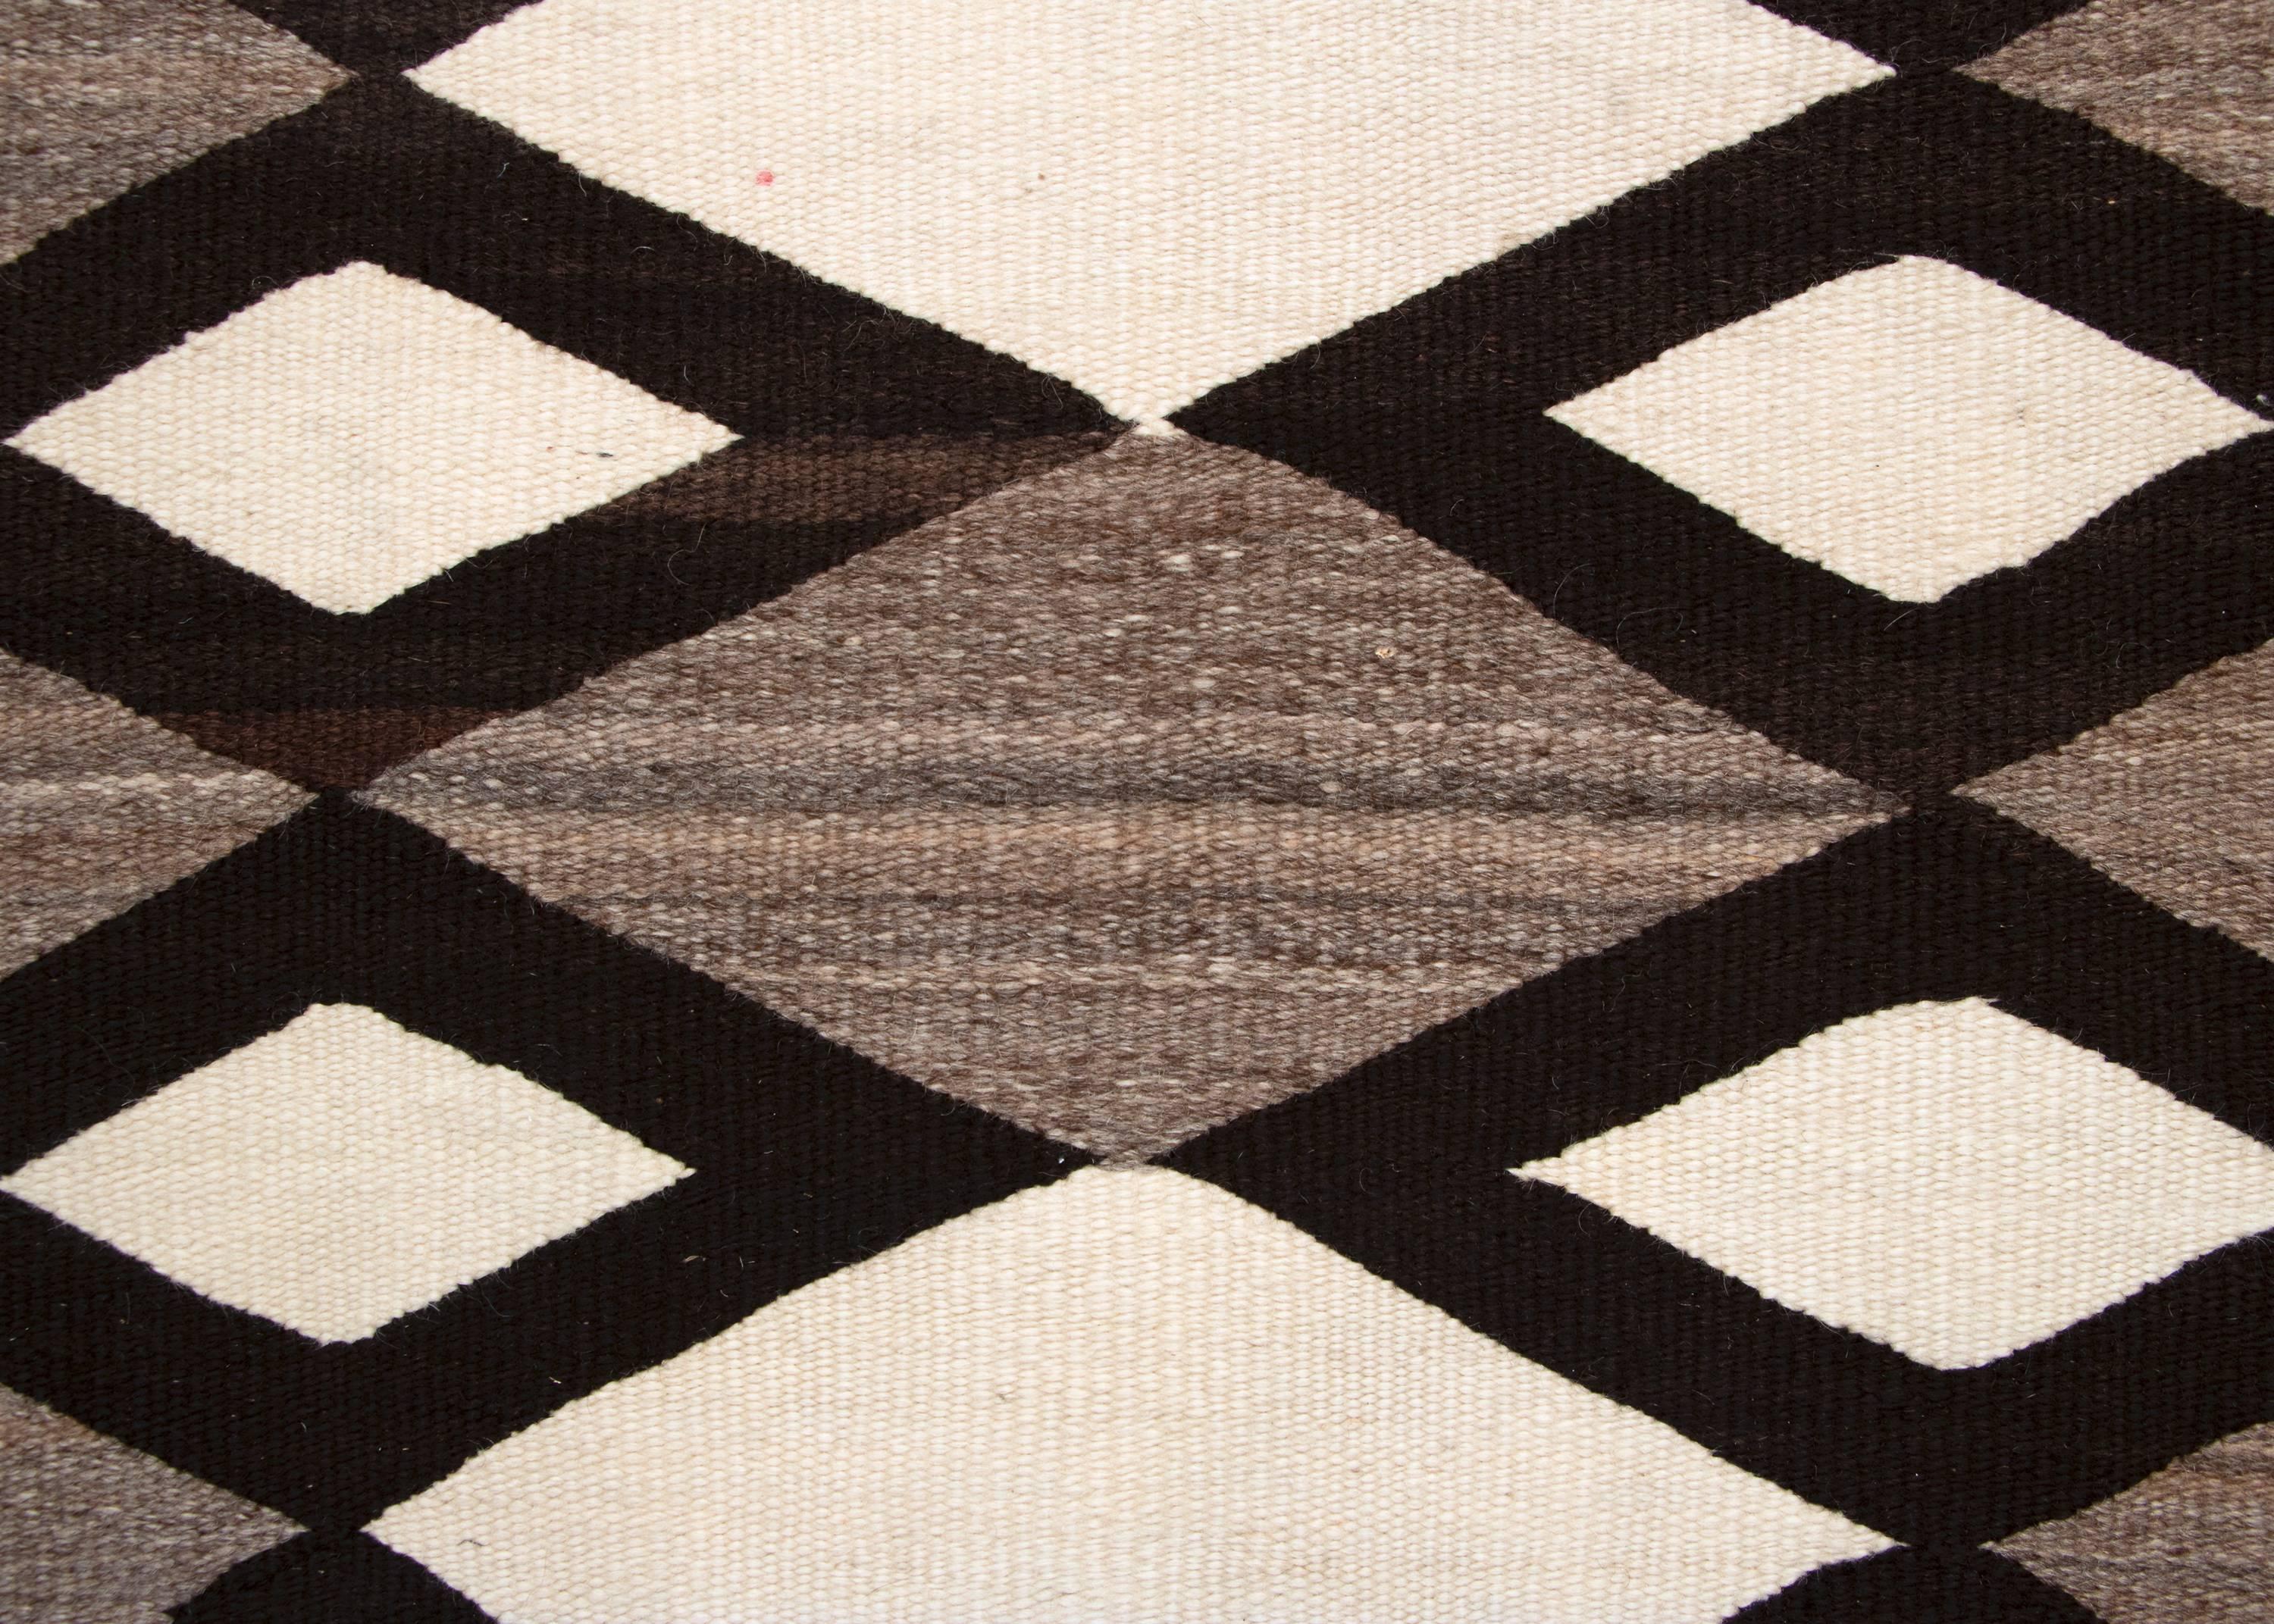 A regional/Pan Reservation rug woven of native hand spun wool with a striking diamond pattern in natural fleece colors of ivory/white, black/brown and gray with subtle brown variations throughout.  Likely woven in the late 19th or very early 20th